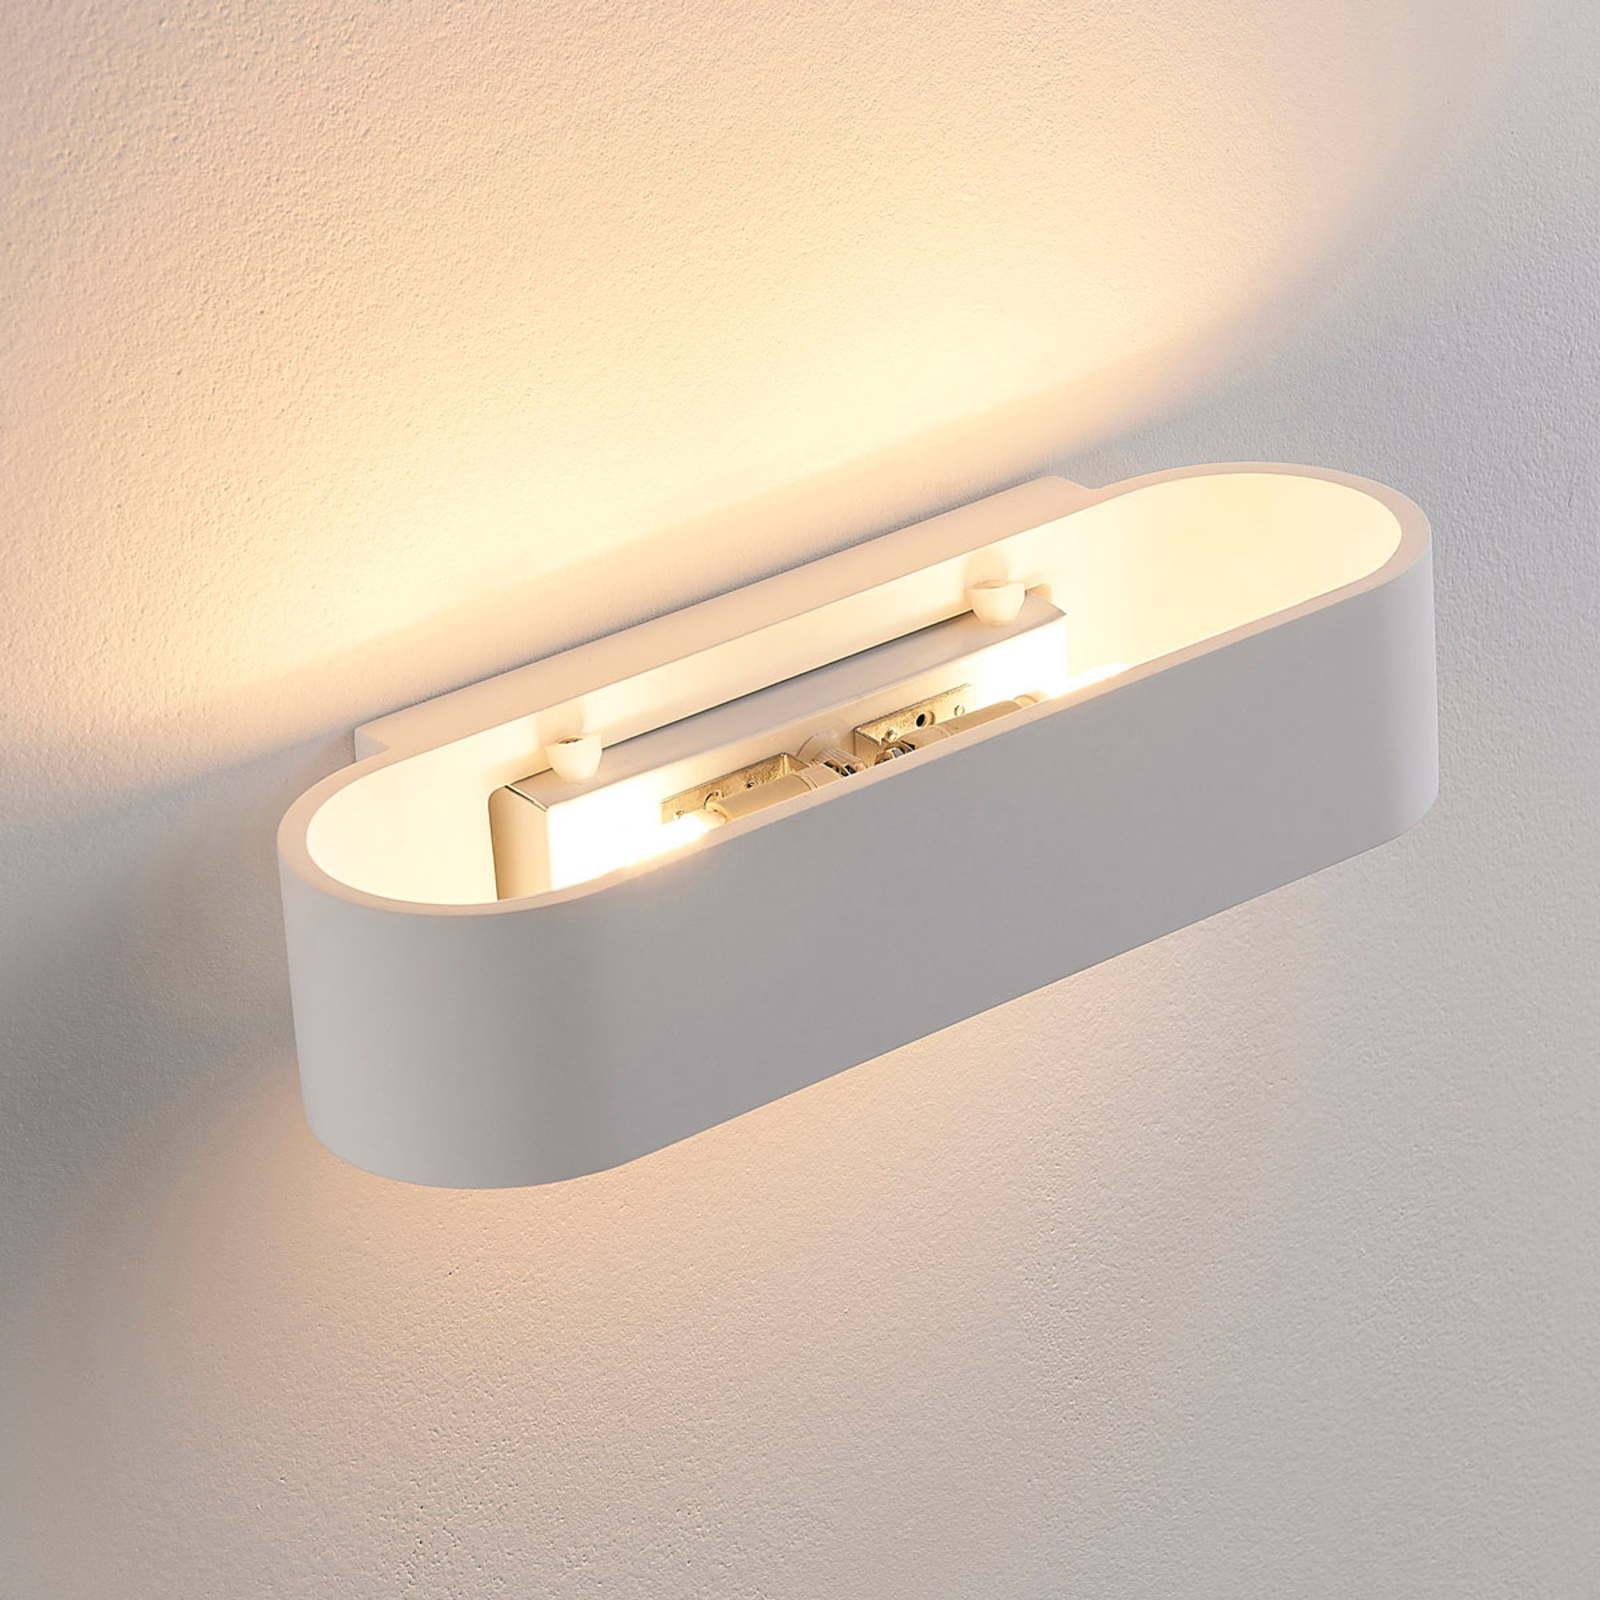 Lindby wall light Fioni, white, plaster, G9, 6.5 cm, paintable